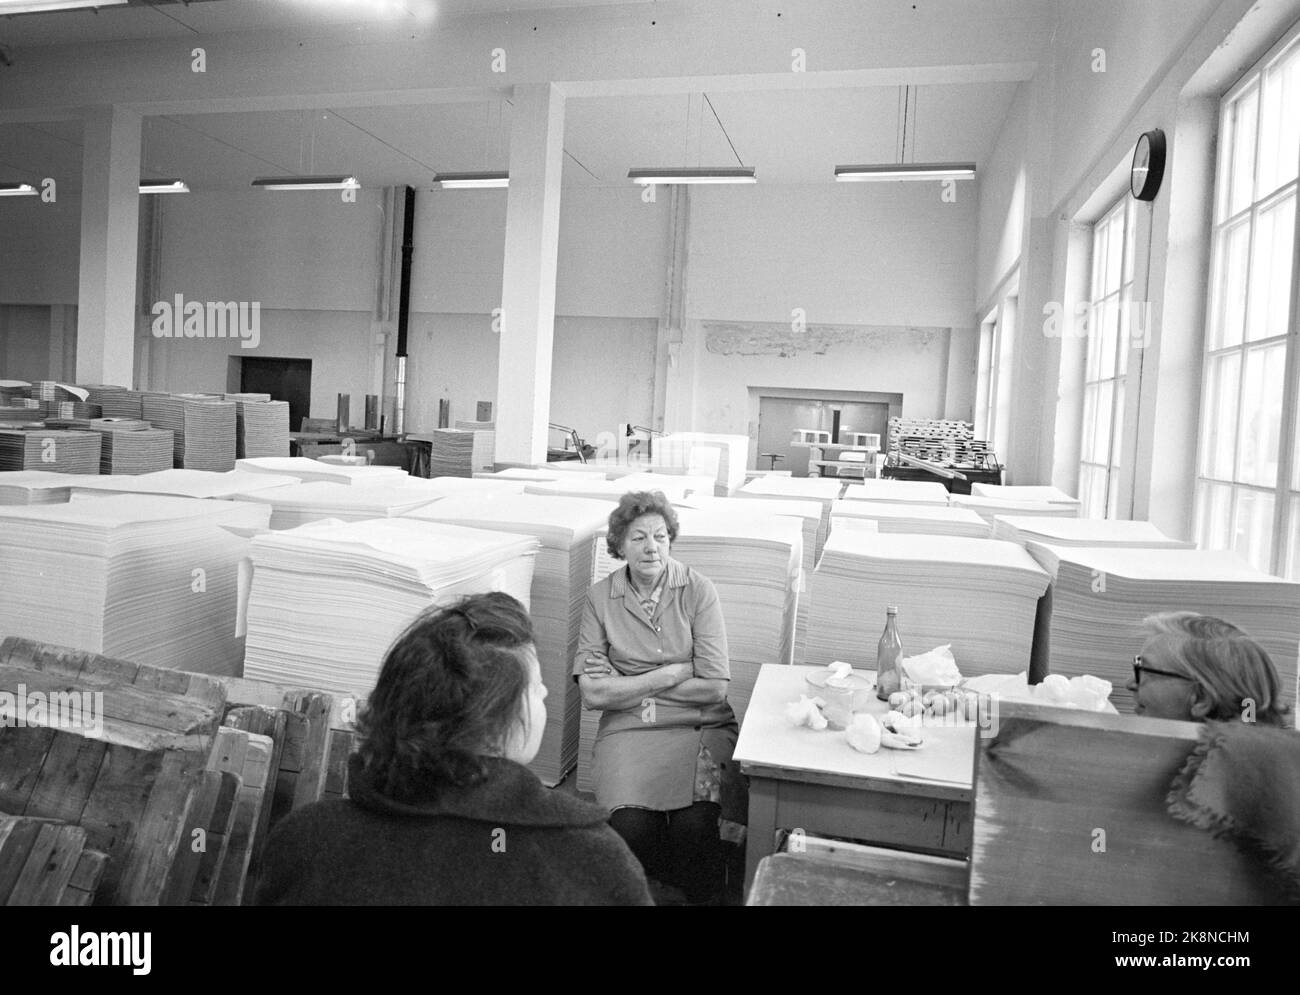 Vestfossen 19701212 The wheels are on Vestfossen. The layoffs at Vestfos Cellulose Factory came as a shock to the employees, as did the bankruptcy. Poor treatment of the employees. Environmental images from the last working days before the company closed its doors. These women take a little break in the paper sorting. They may be discussing new jobs. Photo; Sverre A. Børretzen / Current / NTB Stock Photo